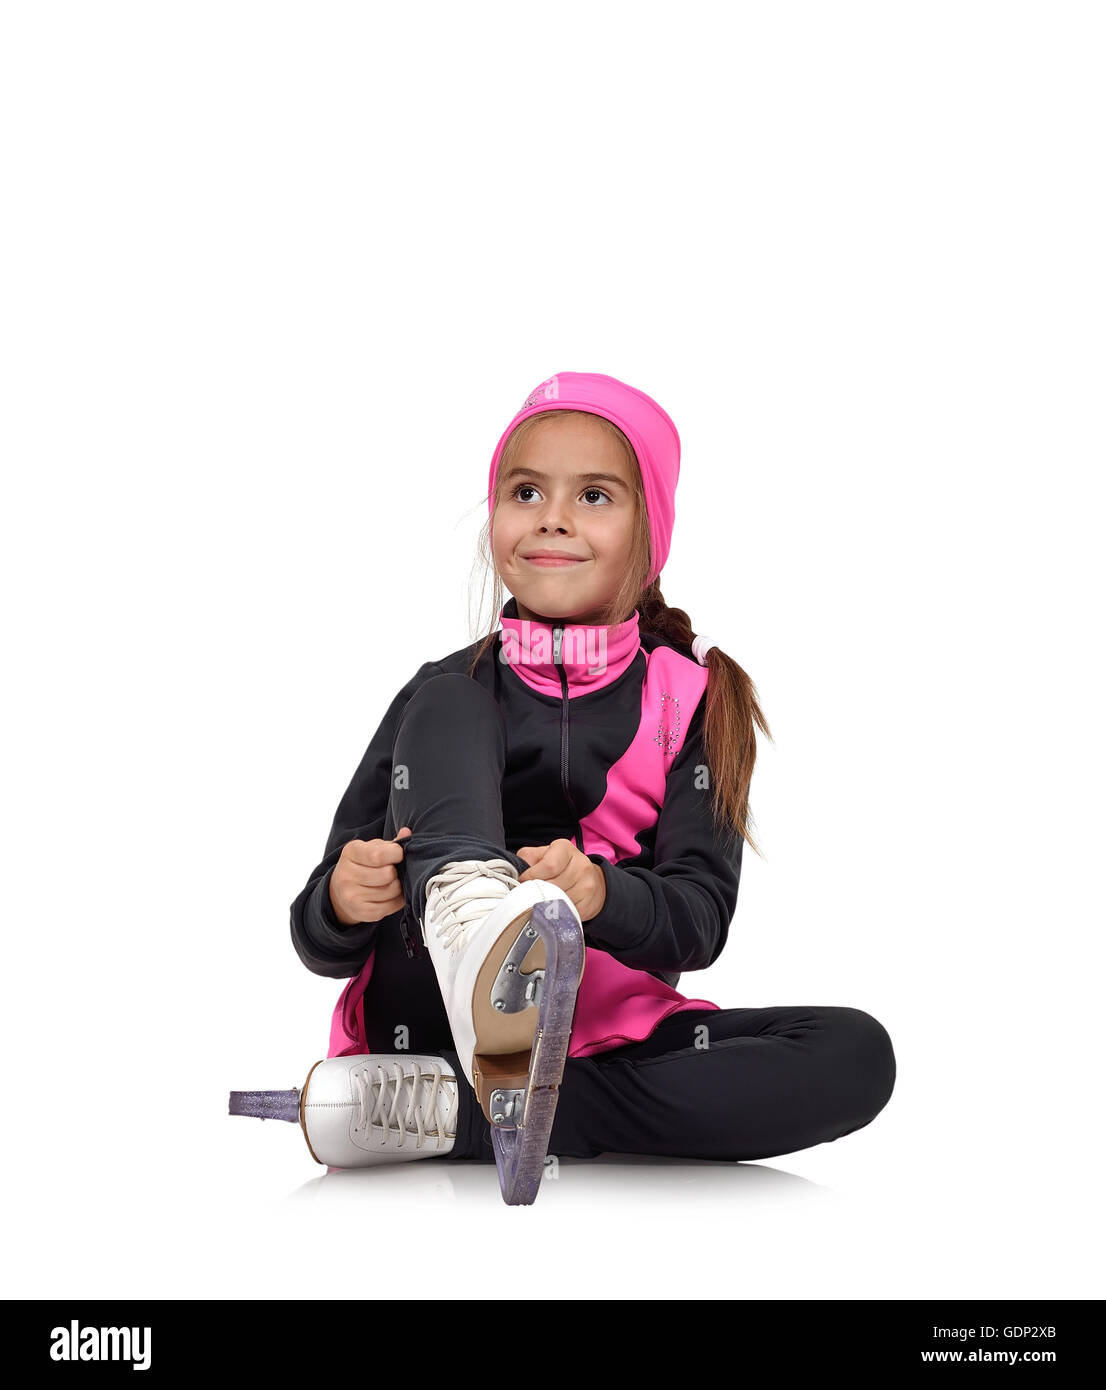 young girl figure skating skates laces on white background Stock Photo